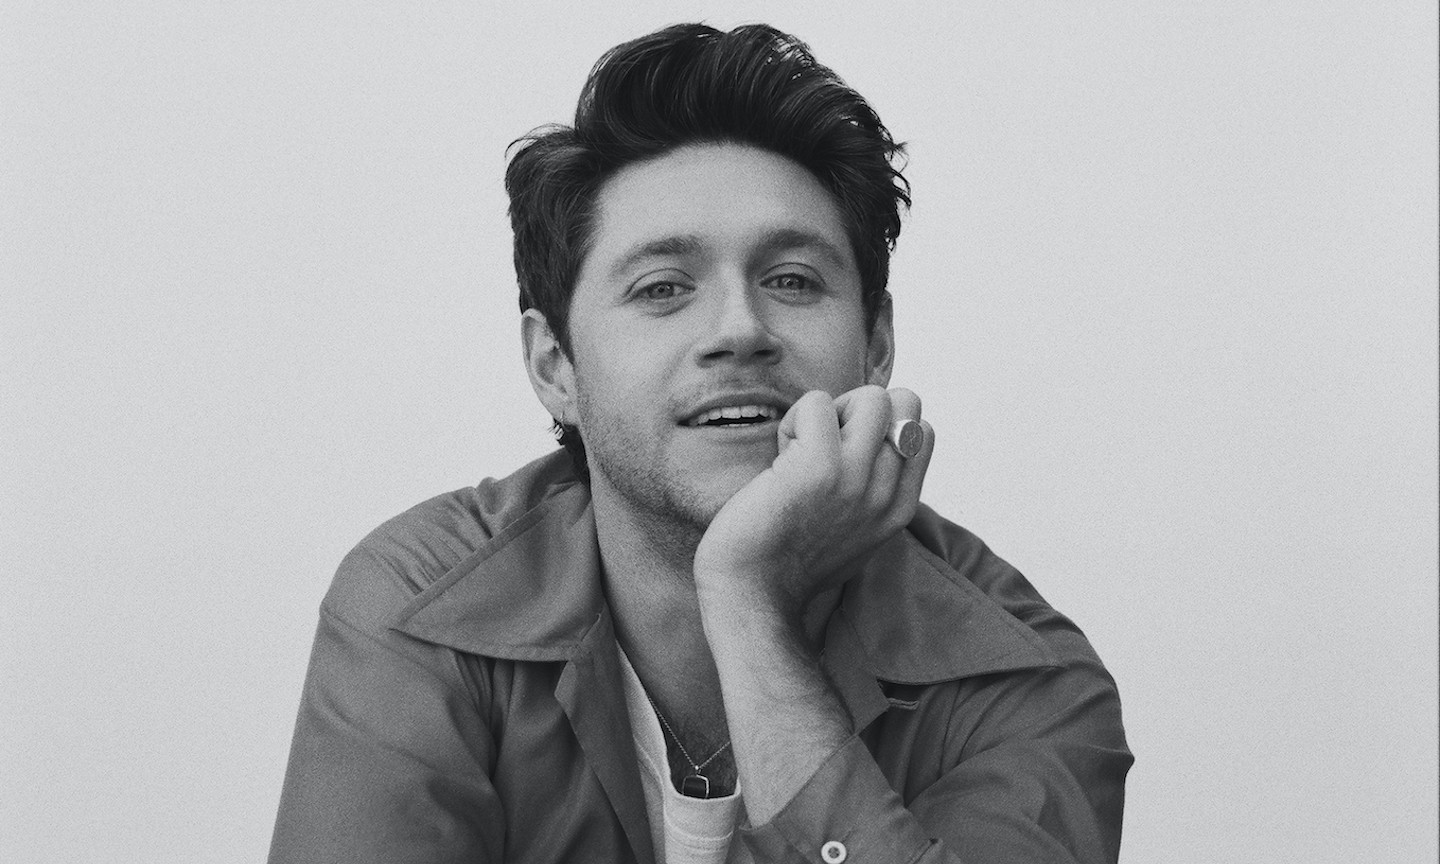 Niall Horan and Anne-Marie release cover of Fleetwood Mac's Everywhere  for BBC Children In Need